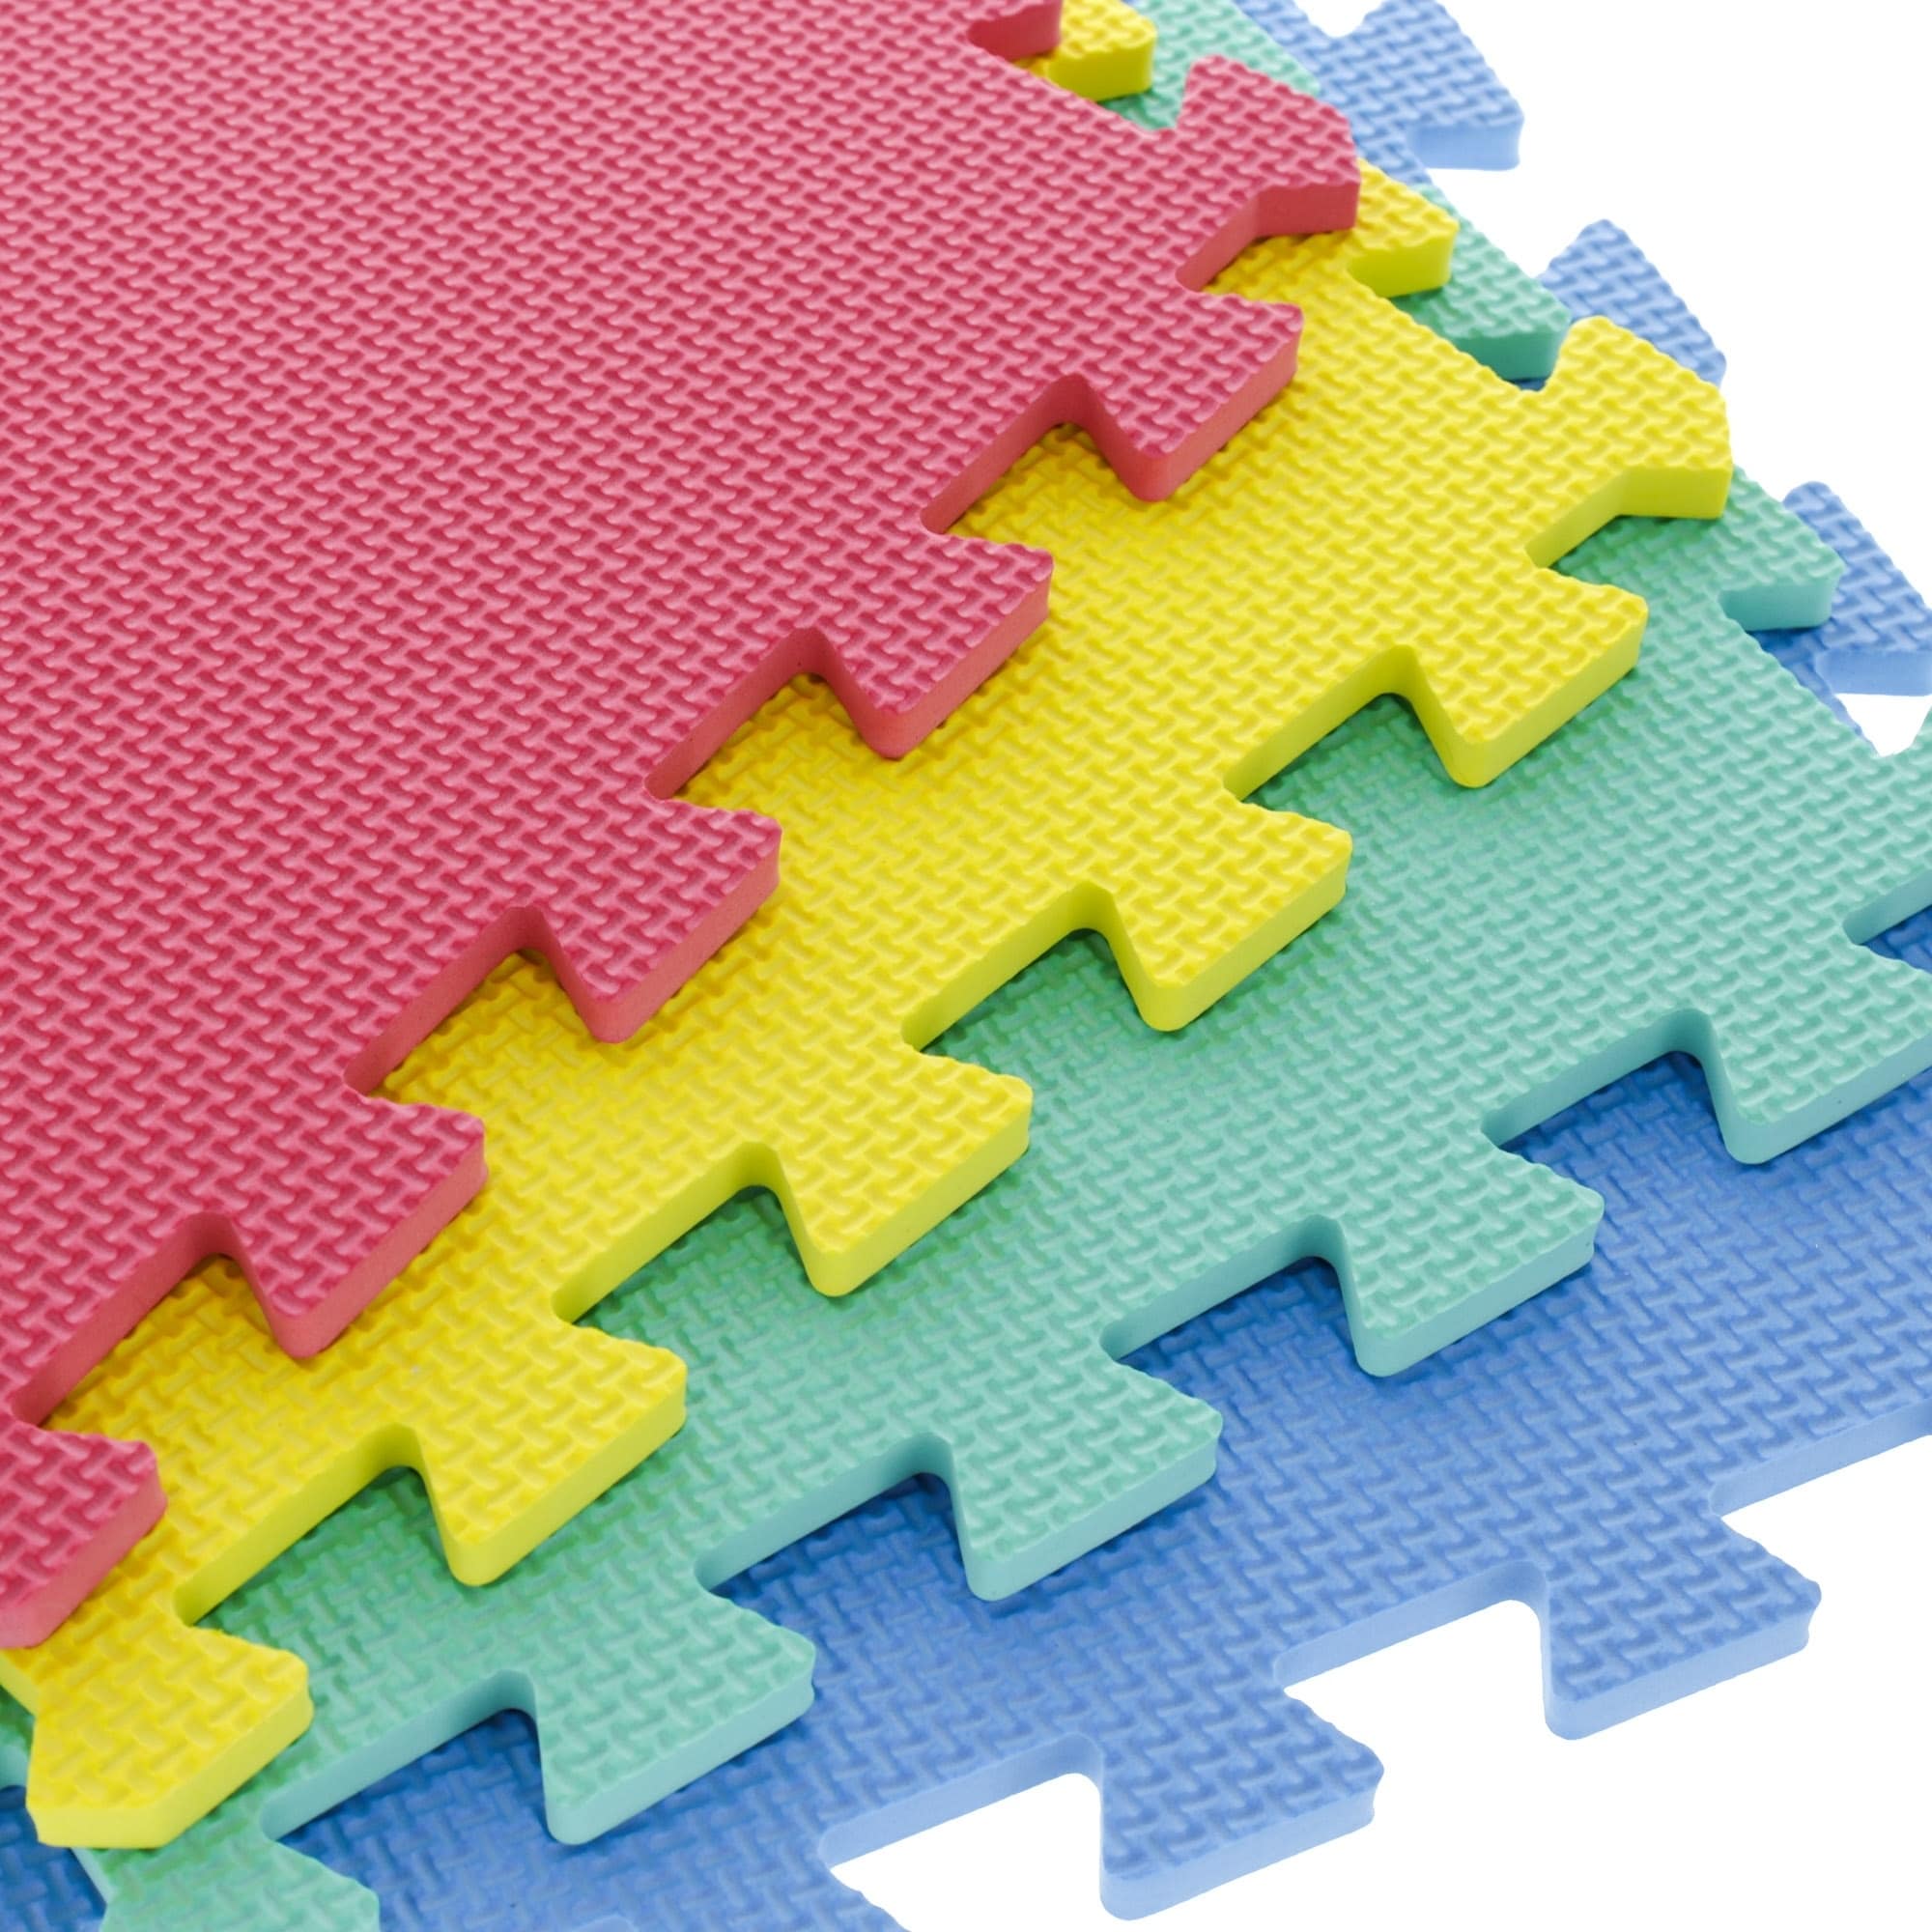 Foam Floor Mats - Interlocking EVA Foam Padding for Home Gym - Non-Toxic  8-Piece Play Mat Set by Stalwart (Multicolor) - On Sale - Bed Bath & Beyond  - 5989905